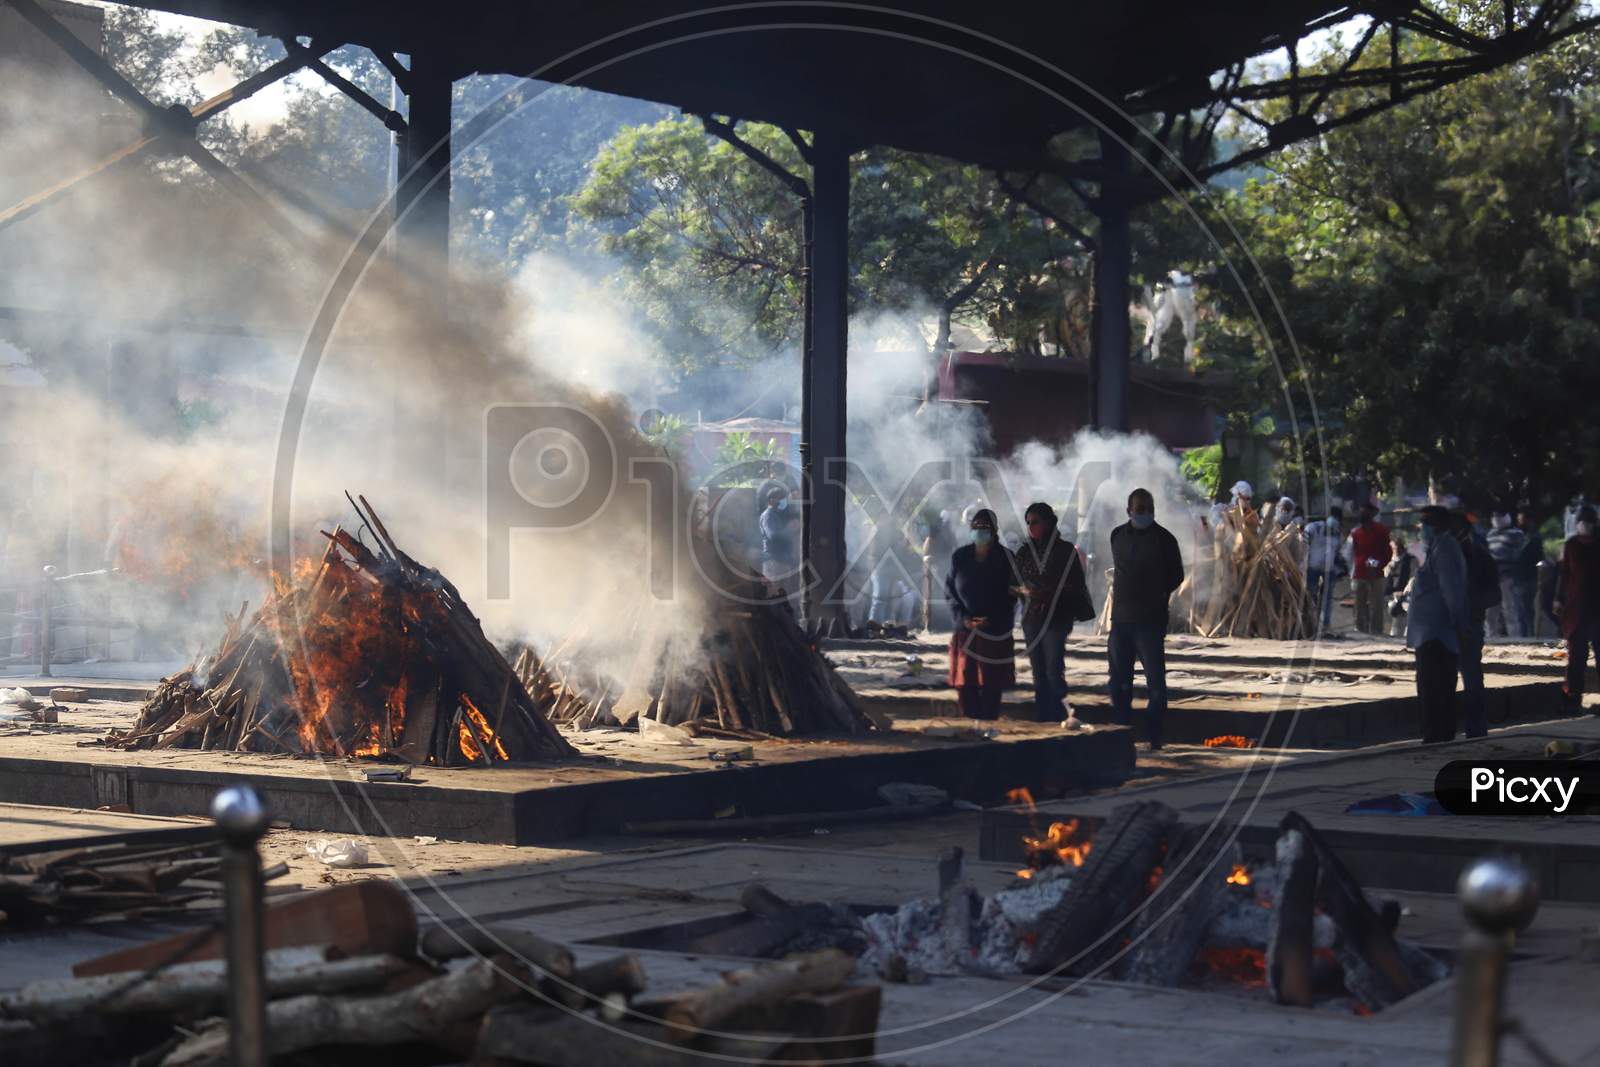 A relative performs final rituals for Covid-19 victim at Nigambodh Ghat crematorium, on November 21, 2020 in New Delhi, India. India records 46,232 fresh coronavirus cases, 564 COVID-19 deaths, and 49,715 one-day recoveries in the last 24 hours, shows government data.